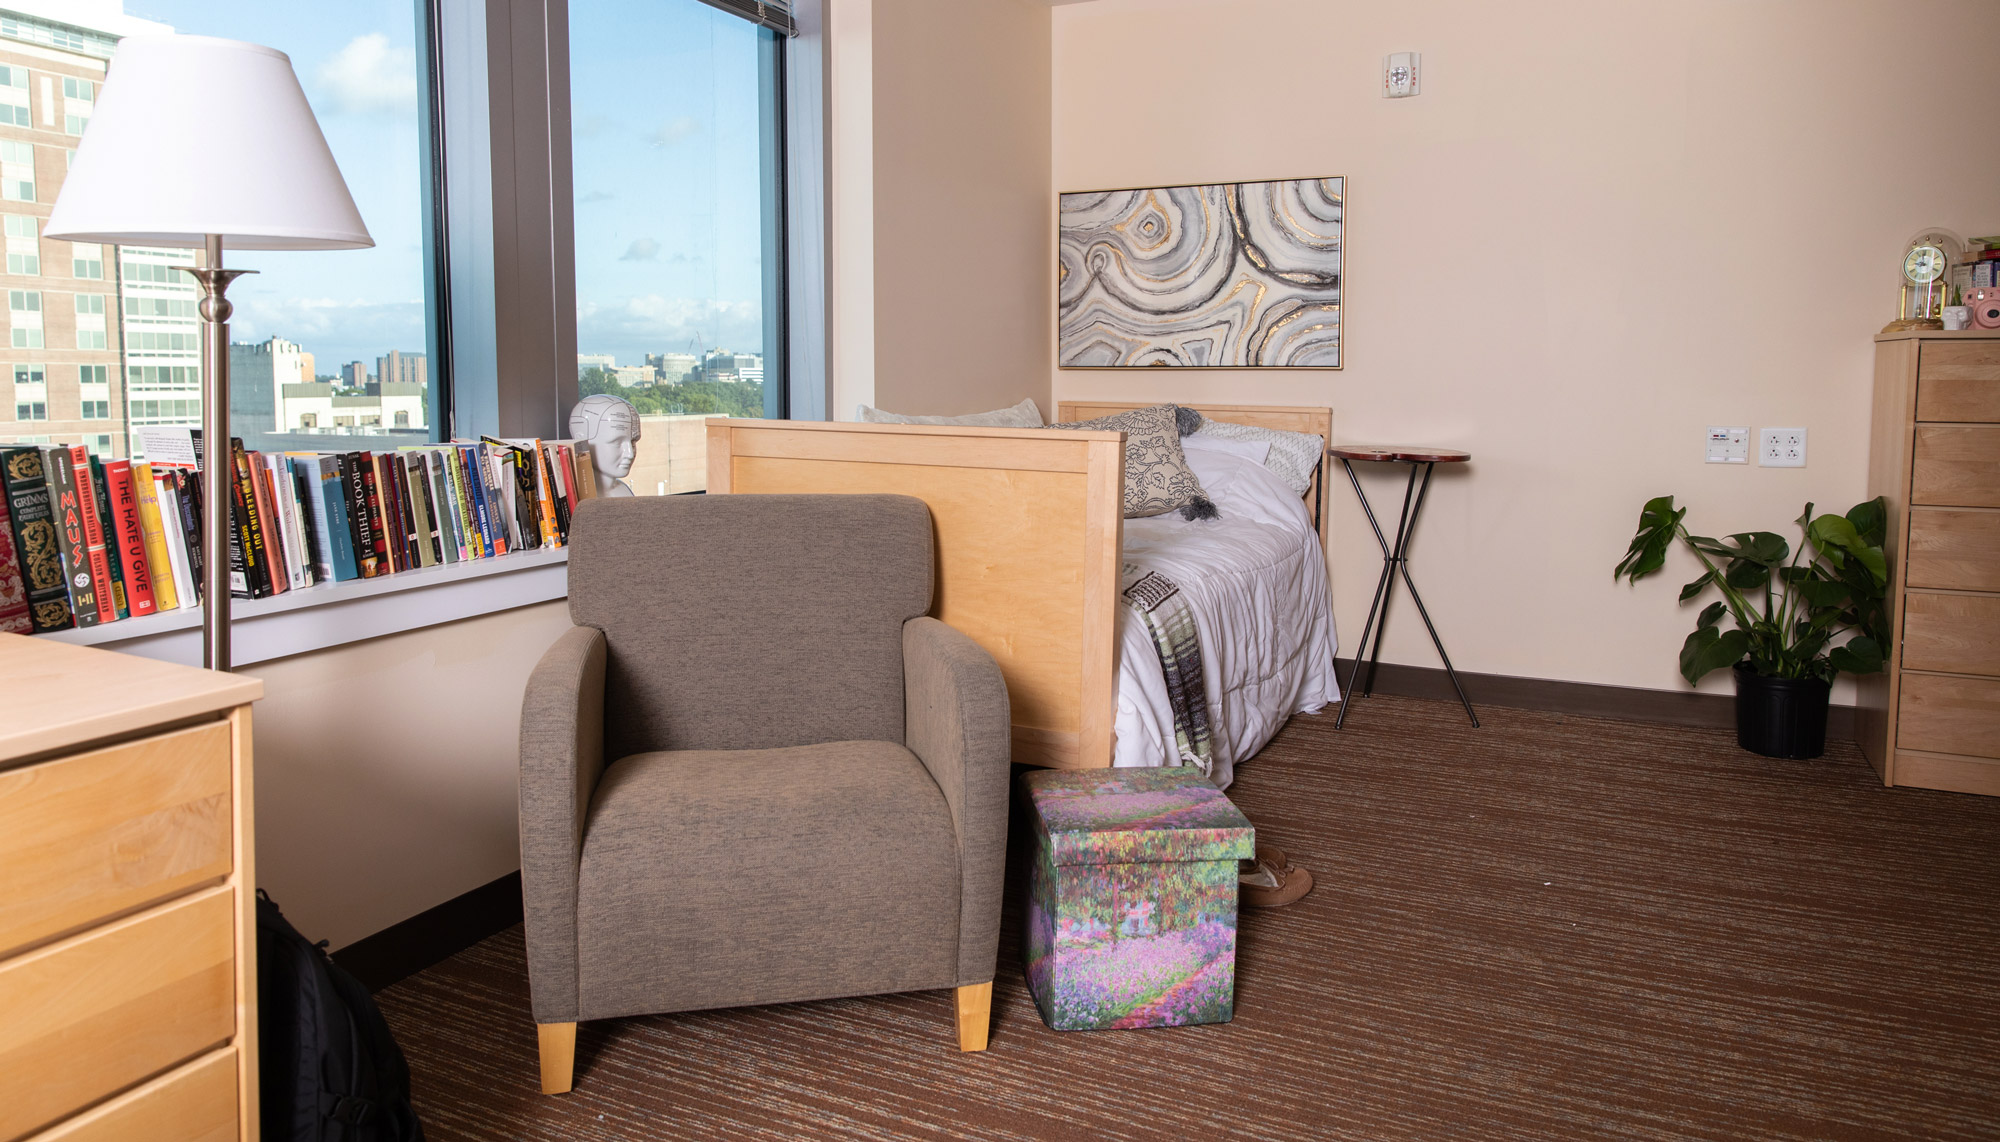 Dorm Design Tips From Bu And Professional Design Experts Bu